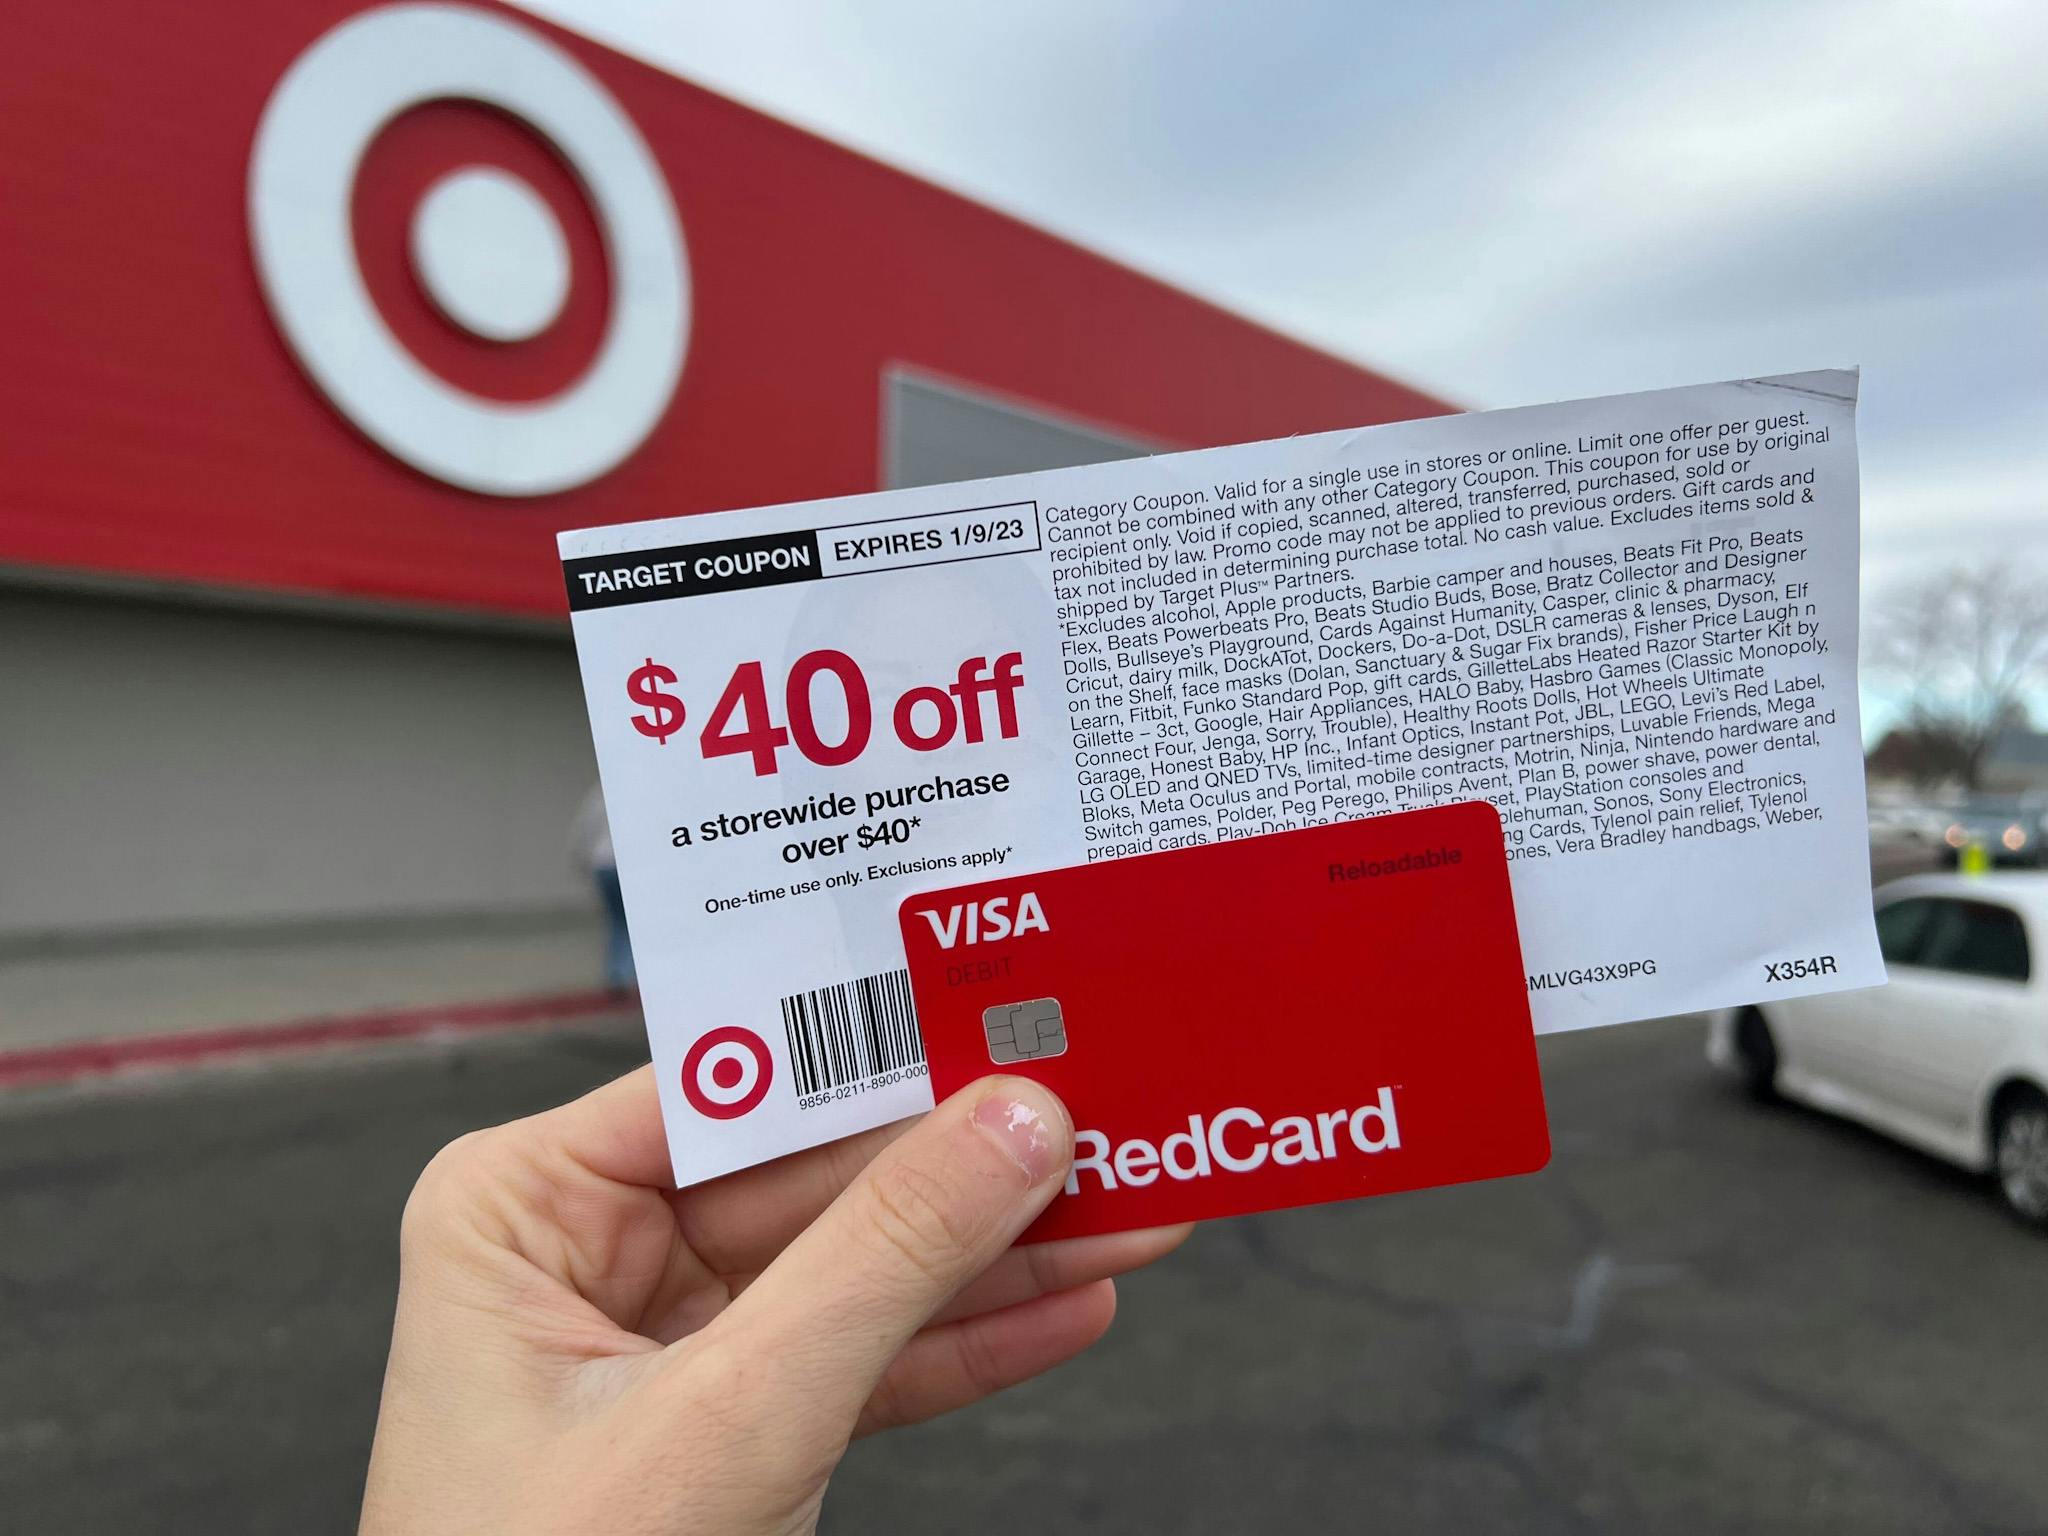 What To Know About the Target RedCard (& How to Get a 40 Off Coupon